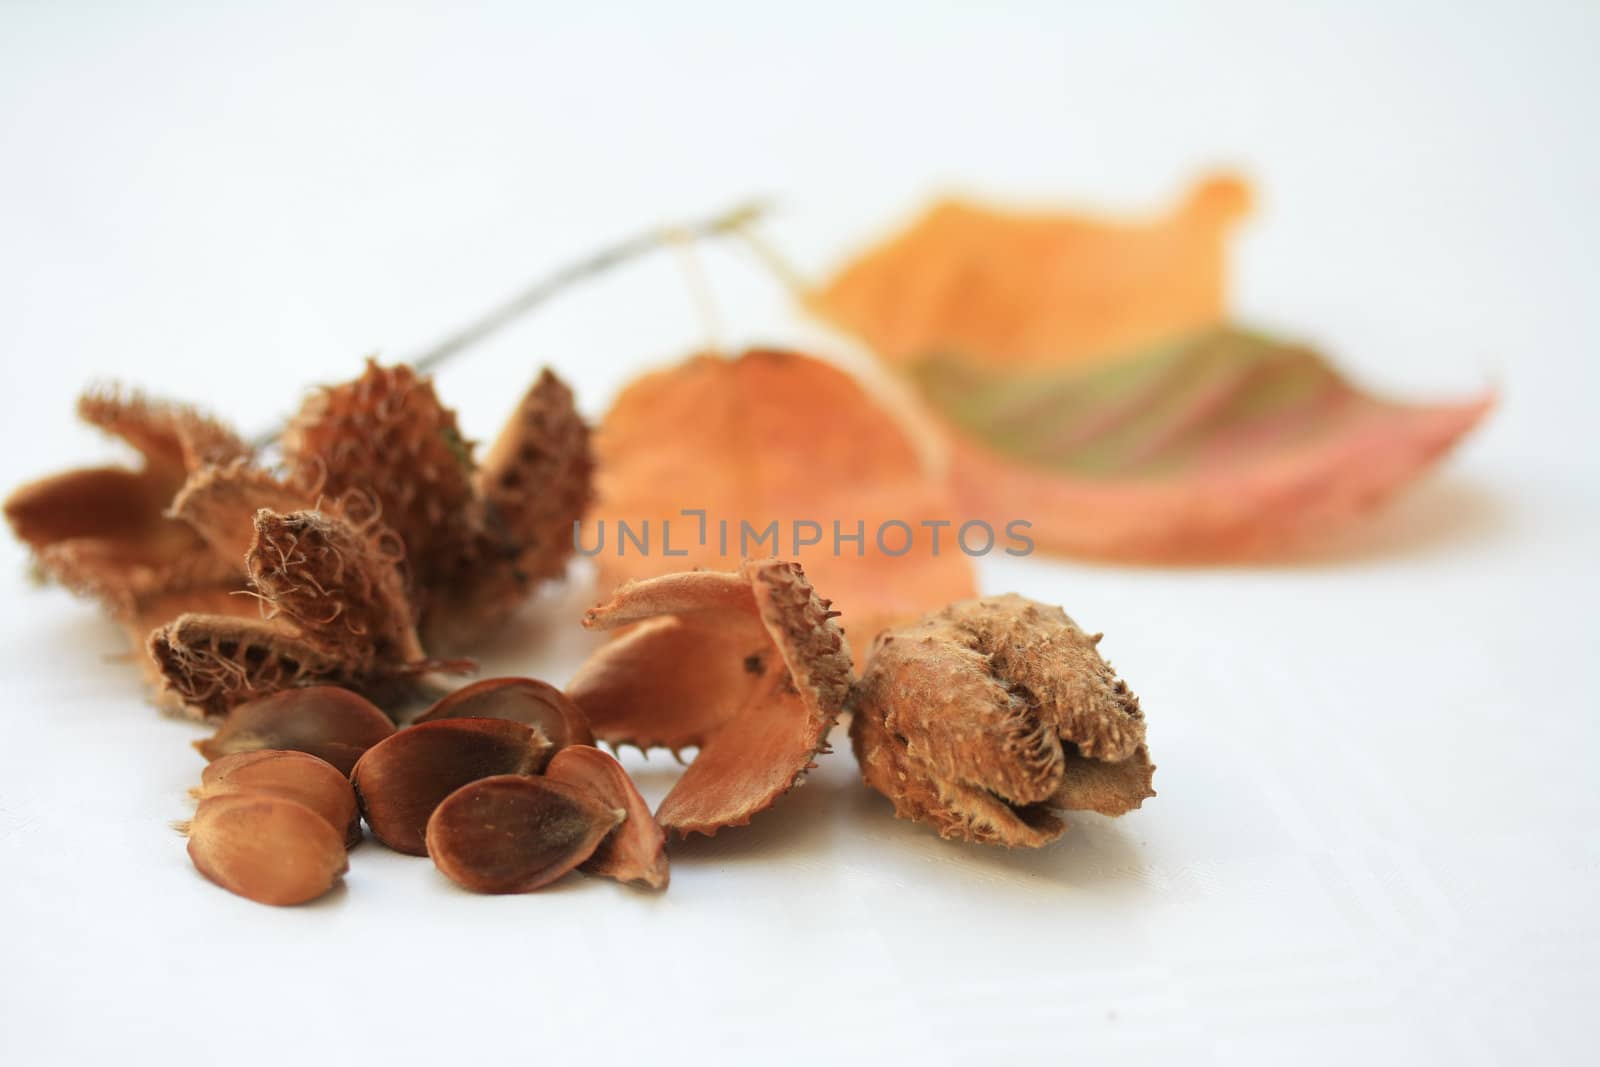 Fruits of european beech and orange leaves